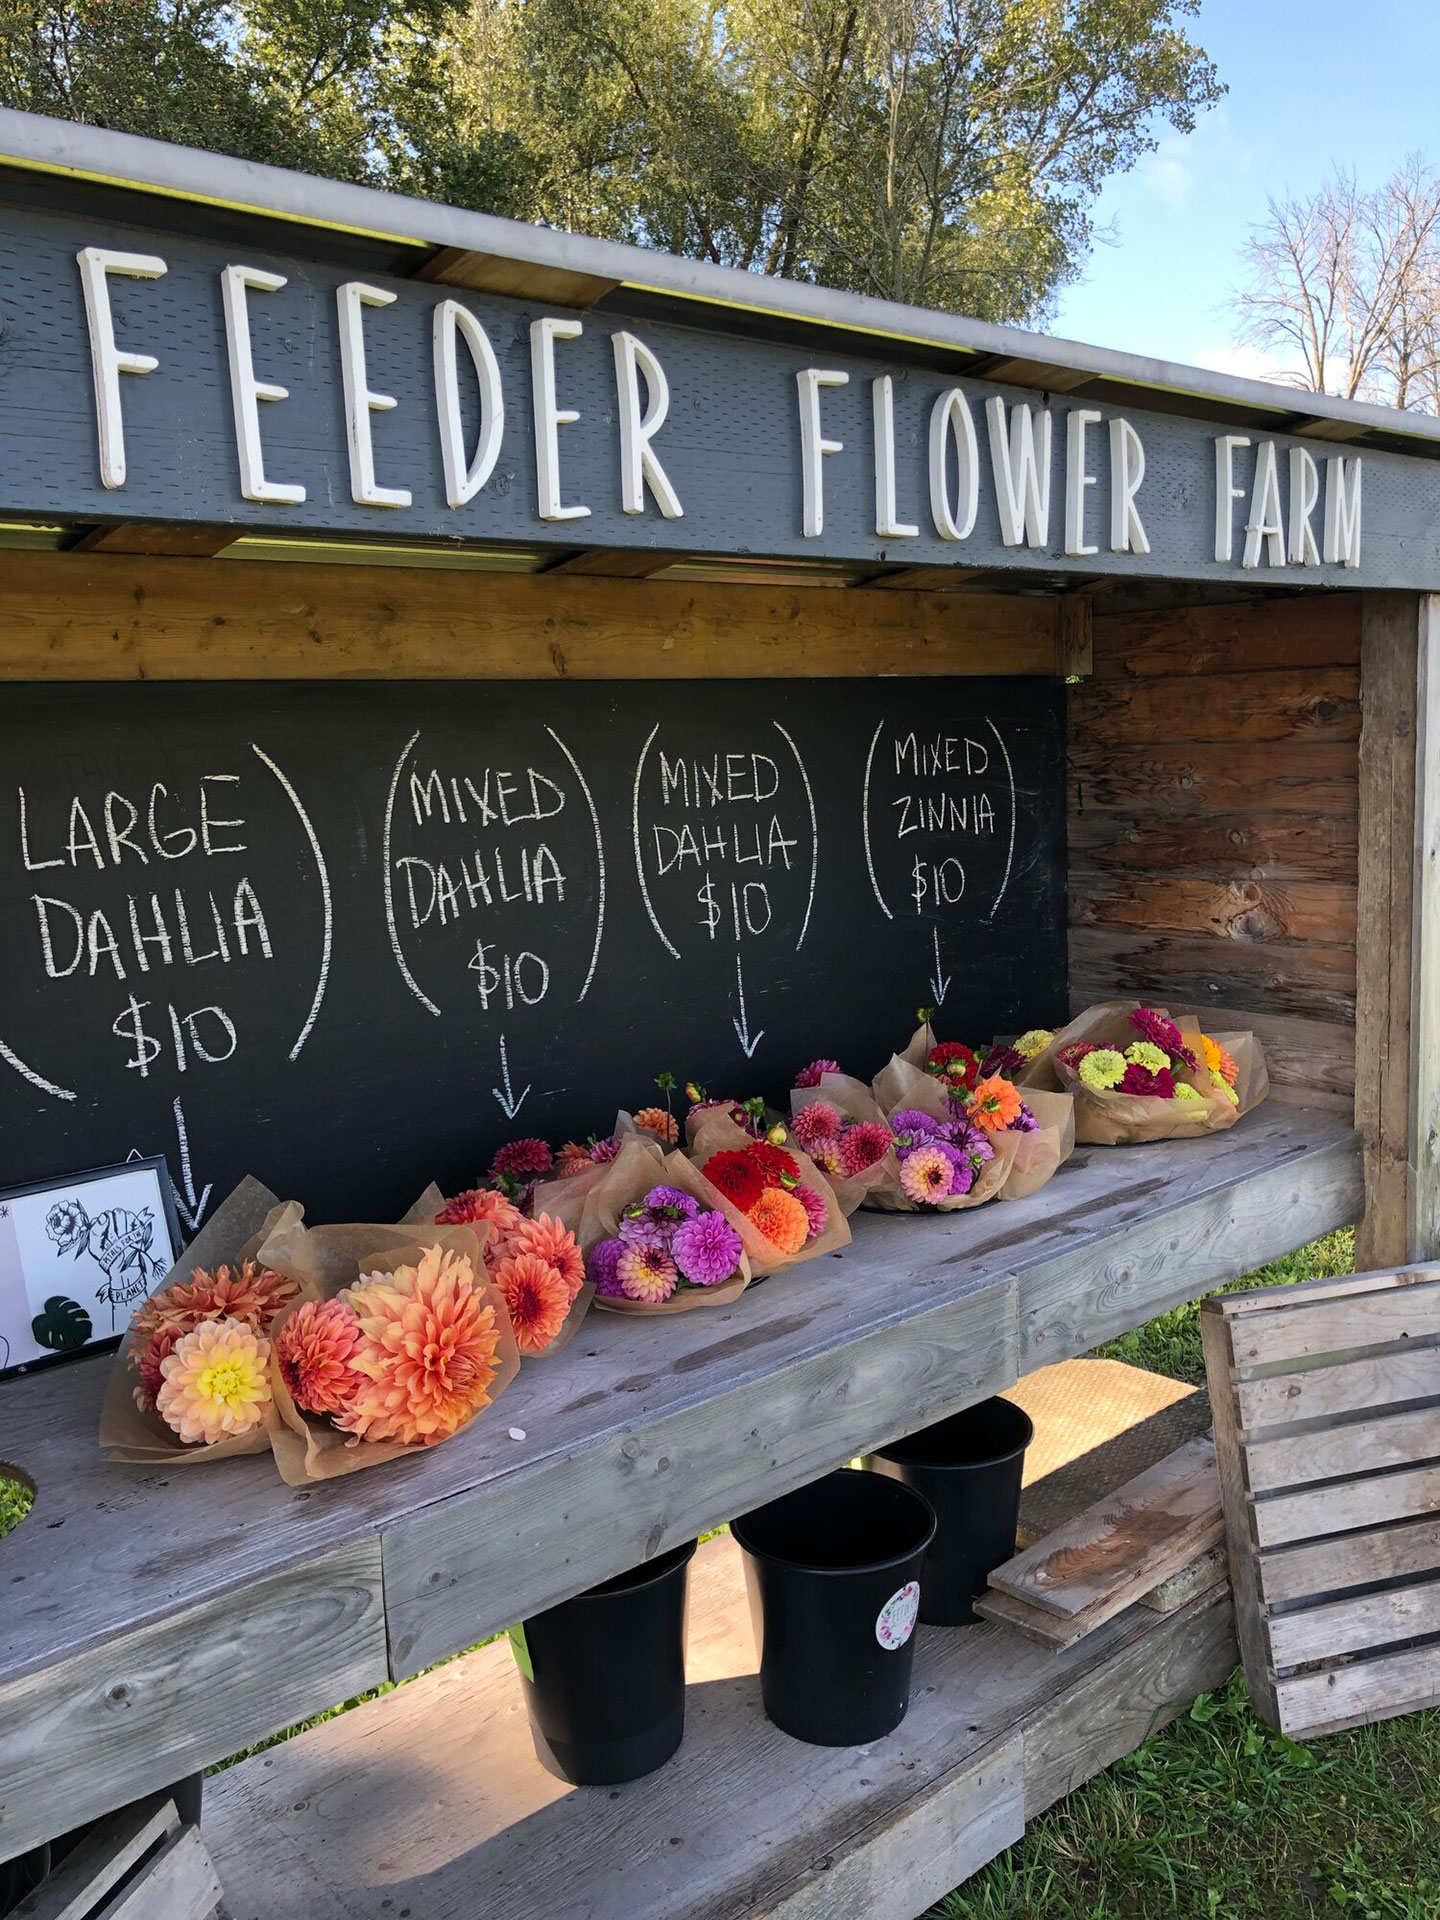 Feeder Flower Farm grows their own dahlias, which provide colourful hues in the late summer and fall.